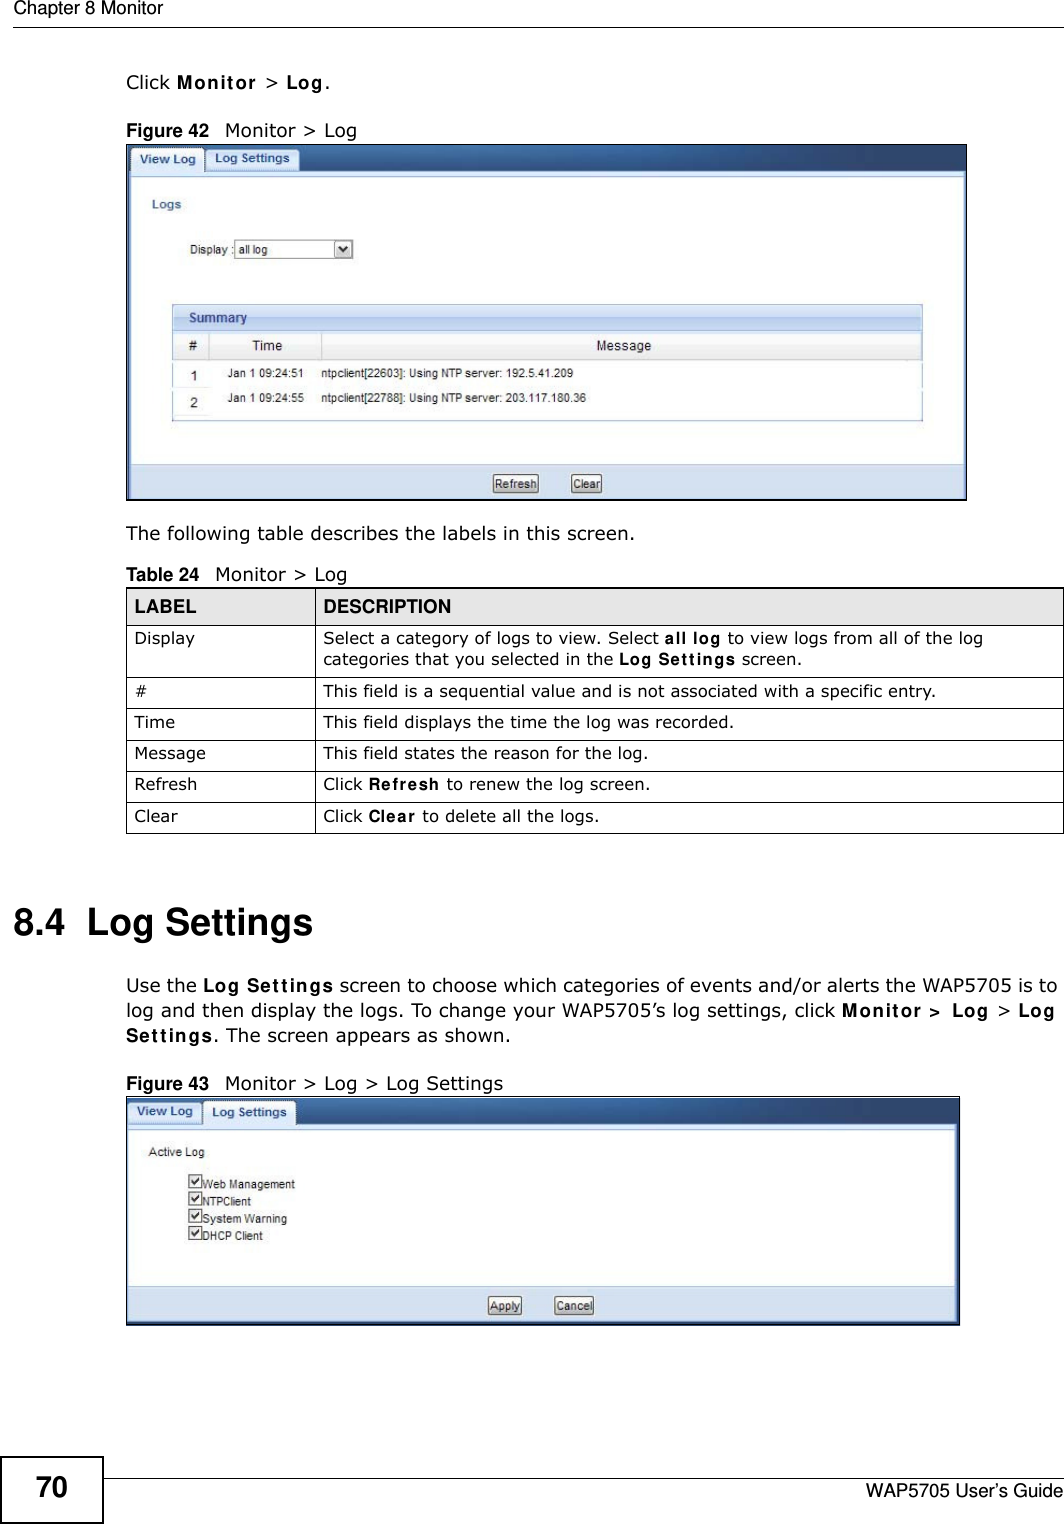 Chapter 8 MonitorWAP5705 User’s Guide70Click M on it or  &gt; Log.Figure 42   Monitor &gt; Log The following table describes the labels in this screen. 8.4  Log Settings Use the Log Set t ings screen to choose which categories of events and/or alerts the WAP5705 is to log and then display the logs. To change your WAP5705’s log settings, click Mon it or &gt;  Log &gt; Log Se t t in gs. The screen appears as shown.Figure 43   Monitor &gt; Log &gt; Log SettingsTable 24   Monitor &gt; LogLABEL DESCRIPTIONDisplay  Select a category of logs to view. Select all log to view logs from all of the log categories that you selected in the Log Set t ings screen.#This field is a sequential value and is not associated with a specific entry.Time  This field displays the time the log was recorded. Message This field states the reason for the log.Refresh Click Refre sh to renew the log screen. Clear Click Clea r to delete all the logs. 